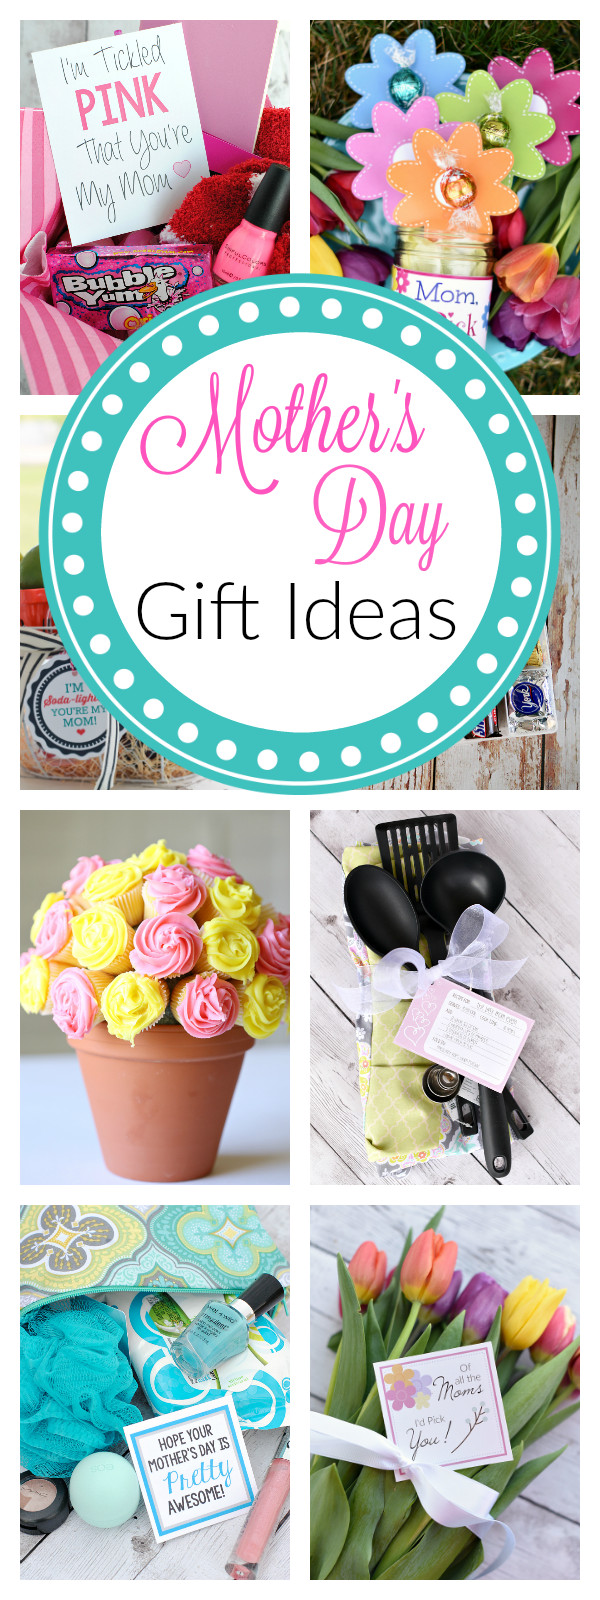 Mothers Day Gift Ideas Pinterest
 25 Fun Mother s Day Gift Ideas – Fun Squared